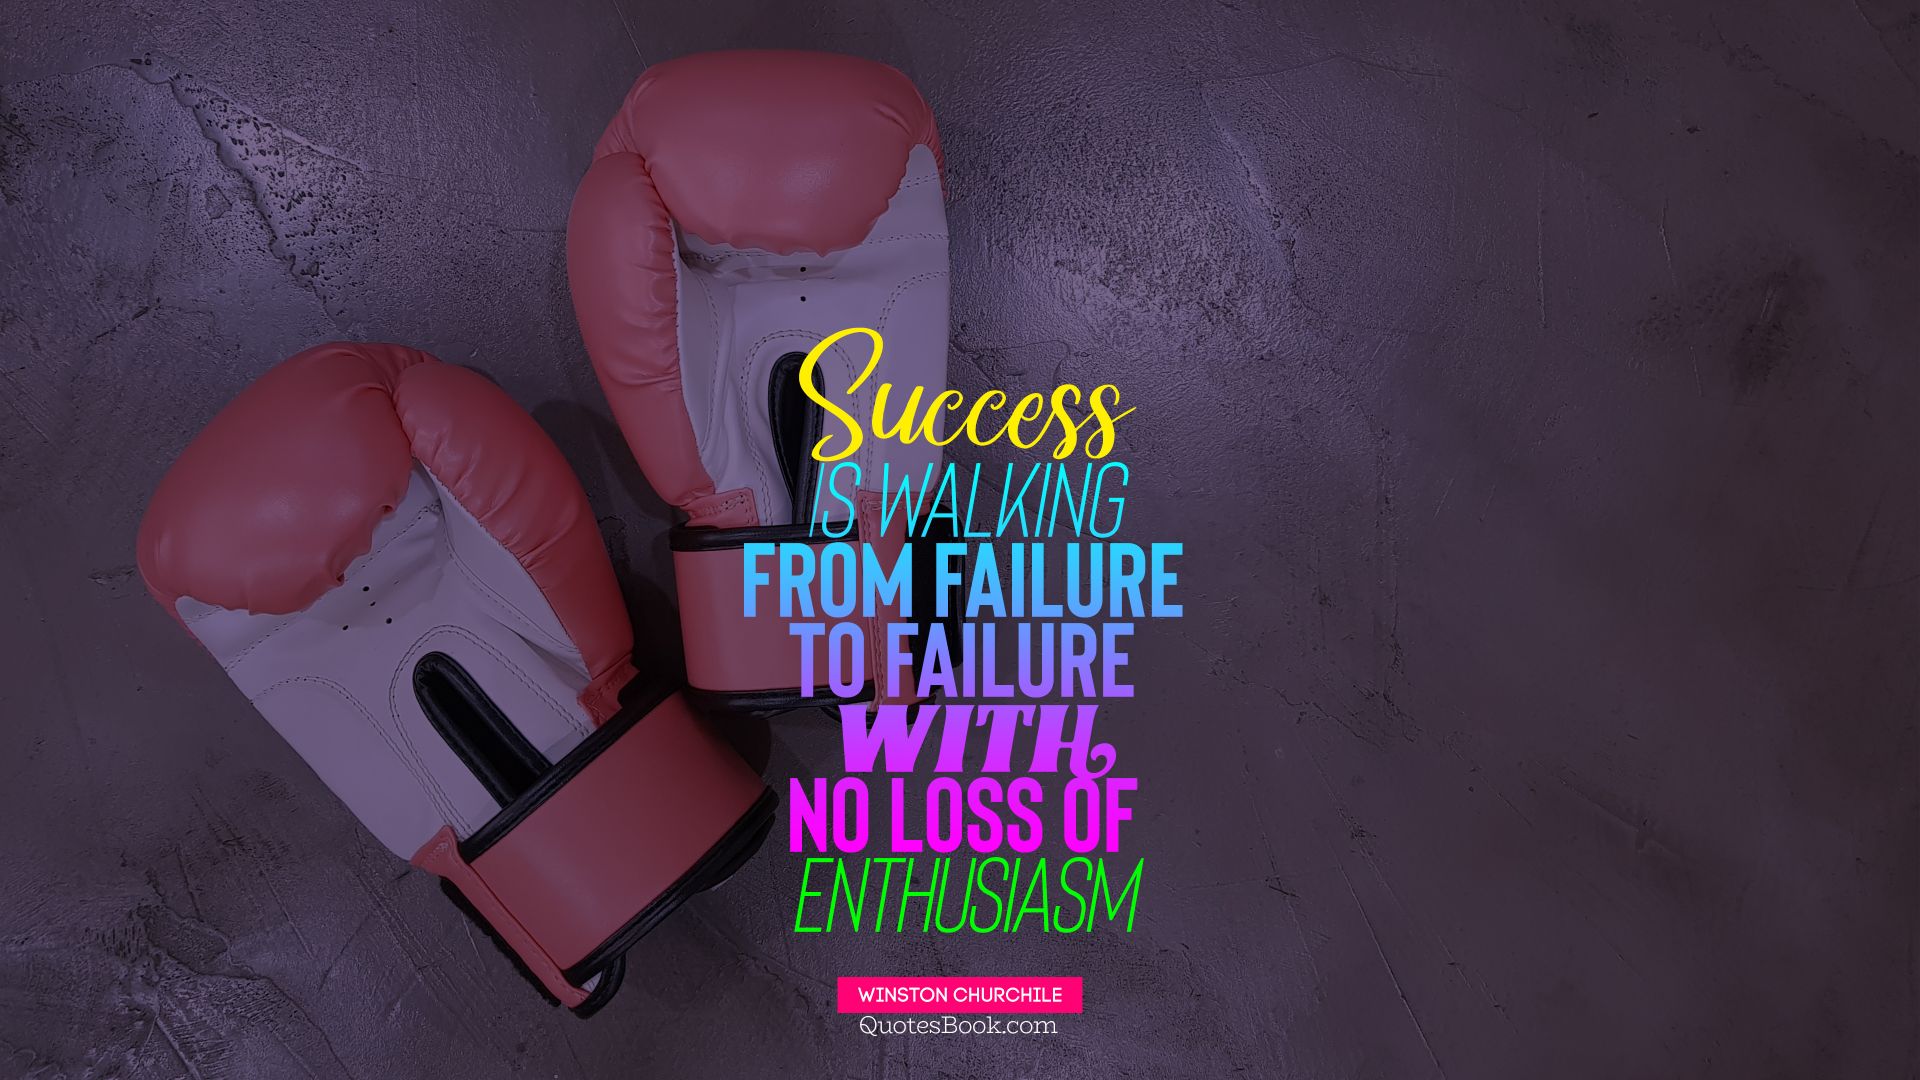 Success is walking from failure to failure with no loss of enthusiasm. - Quote by Winston Churchill